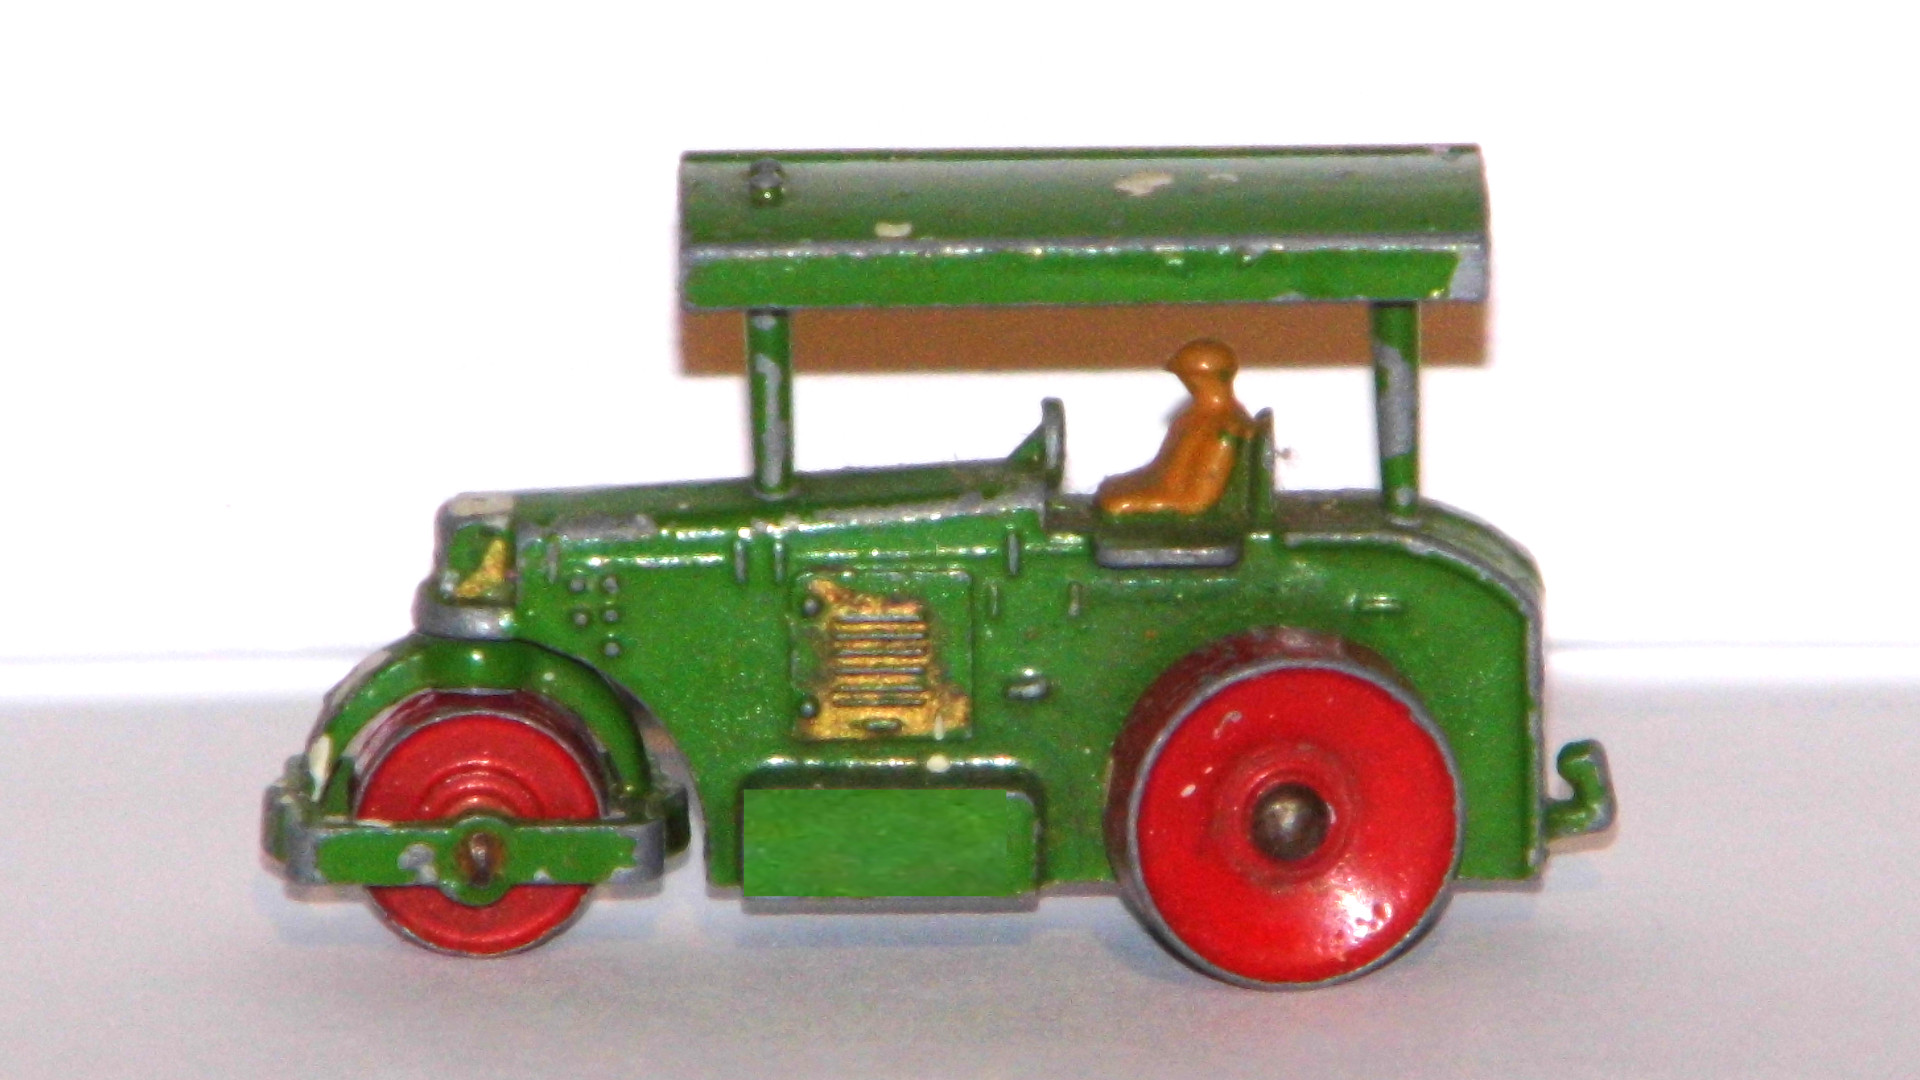 First model of Matchbox, issued 1953